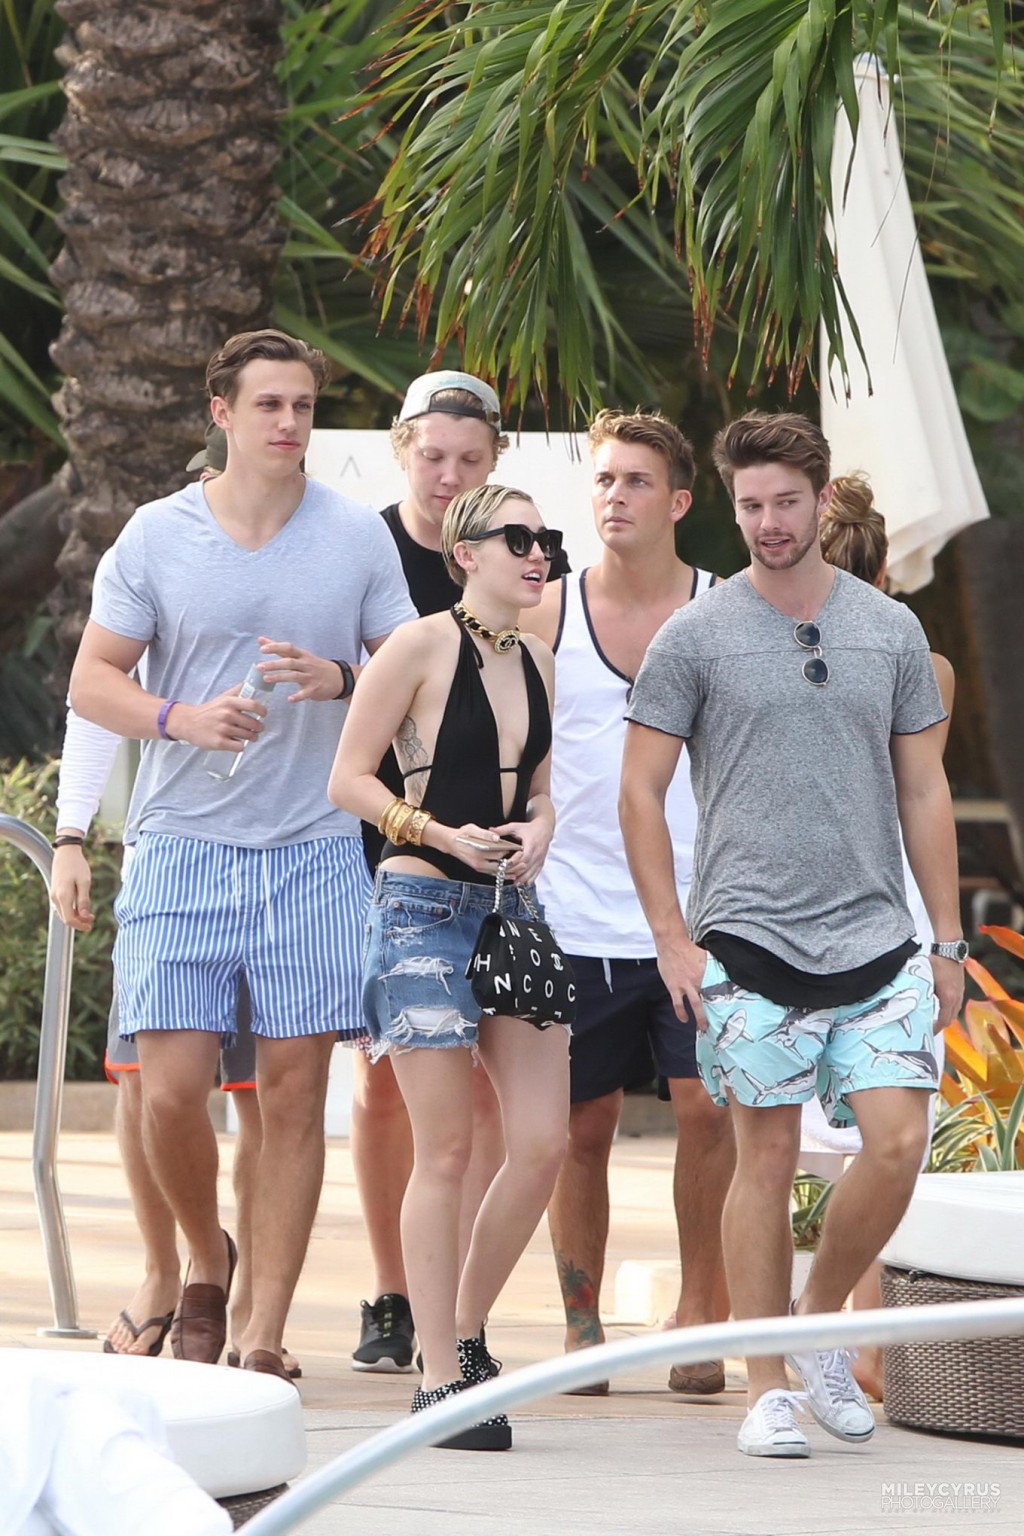 Miley Cyrus wearing swimsuit and hotpants at a pool in Miami #75178833